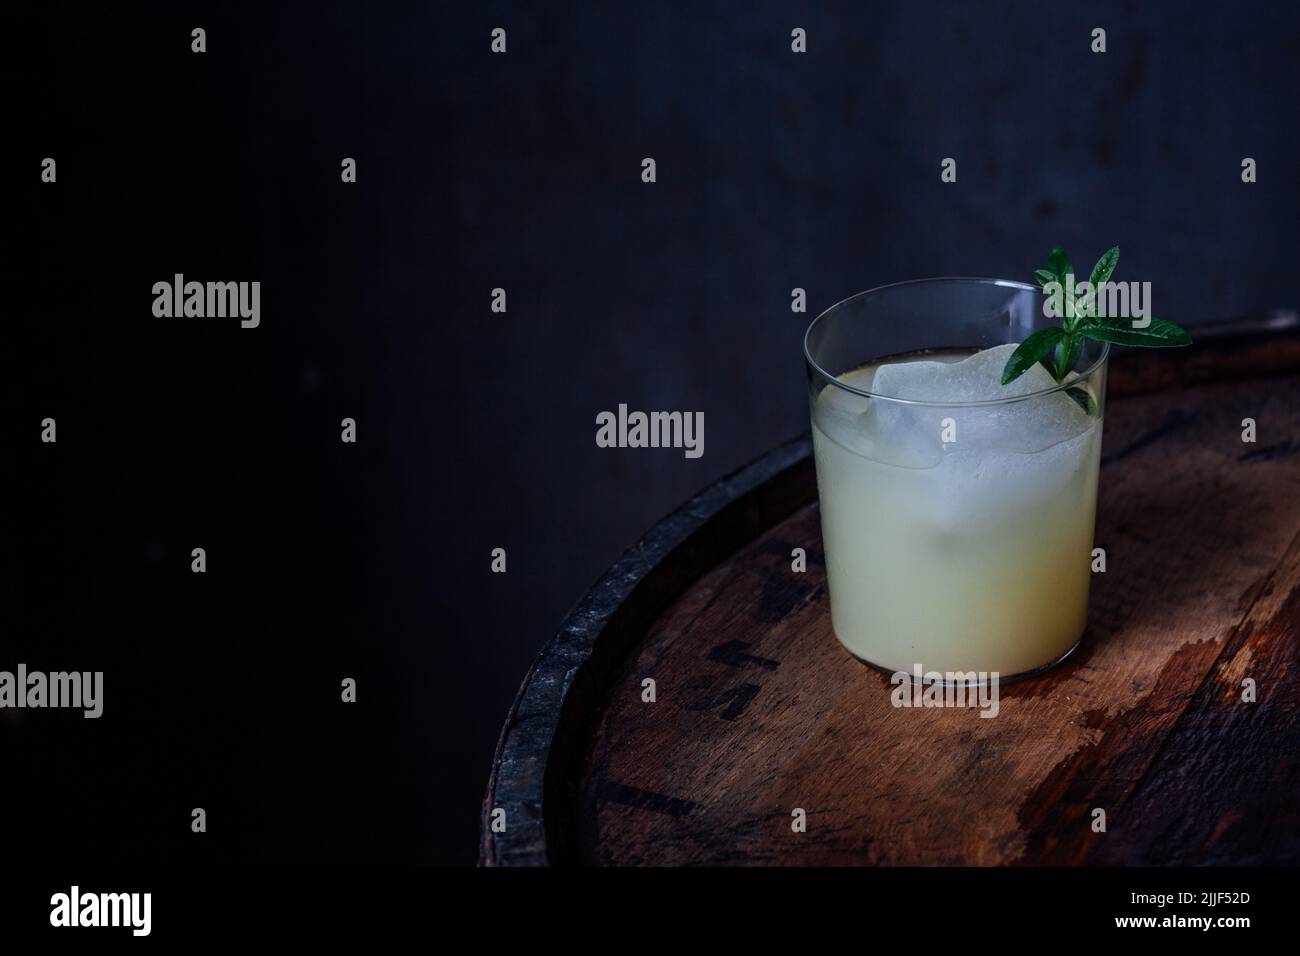 glass of ginger beer Moscow mule with large ice and lemon verbena herb garnish on wood barrel dark background Stock Photo